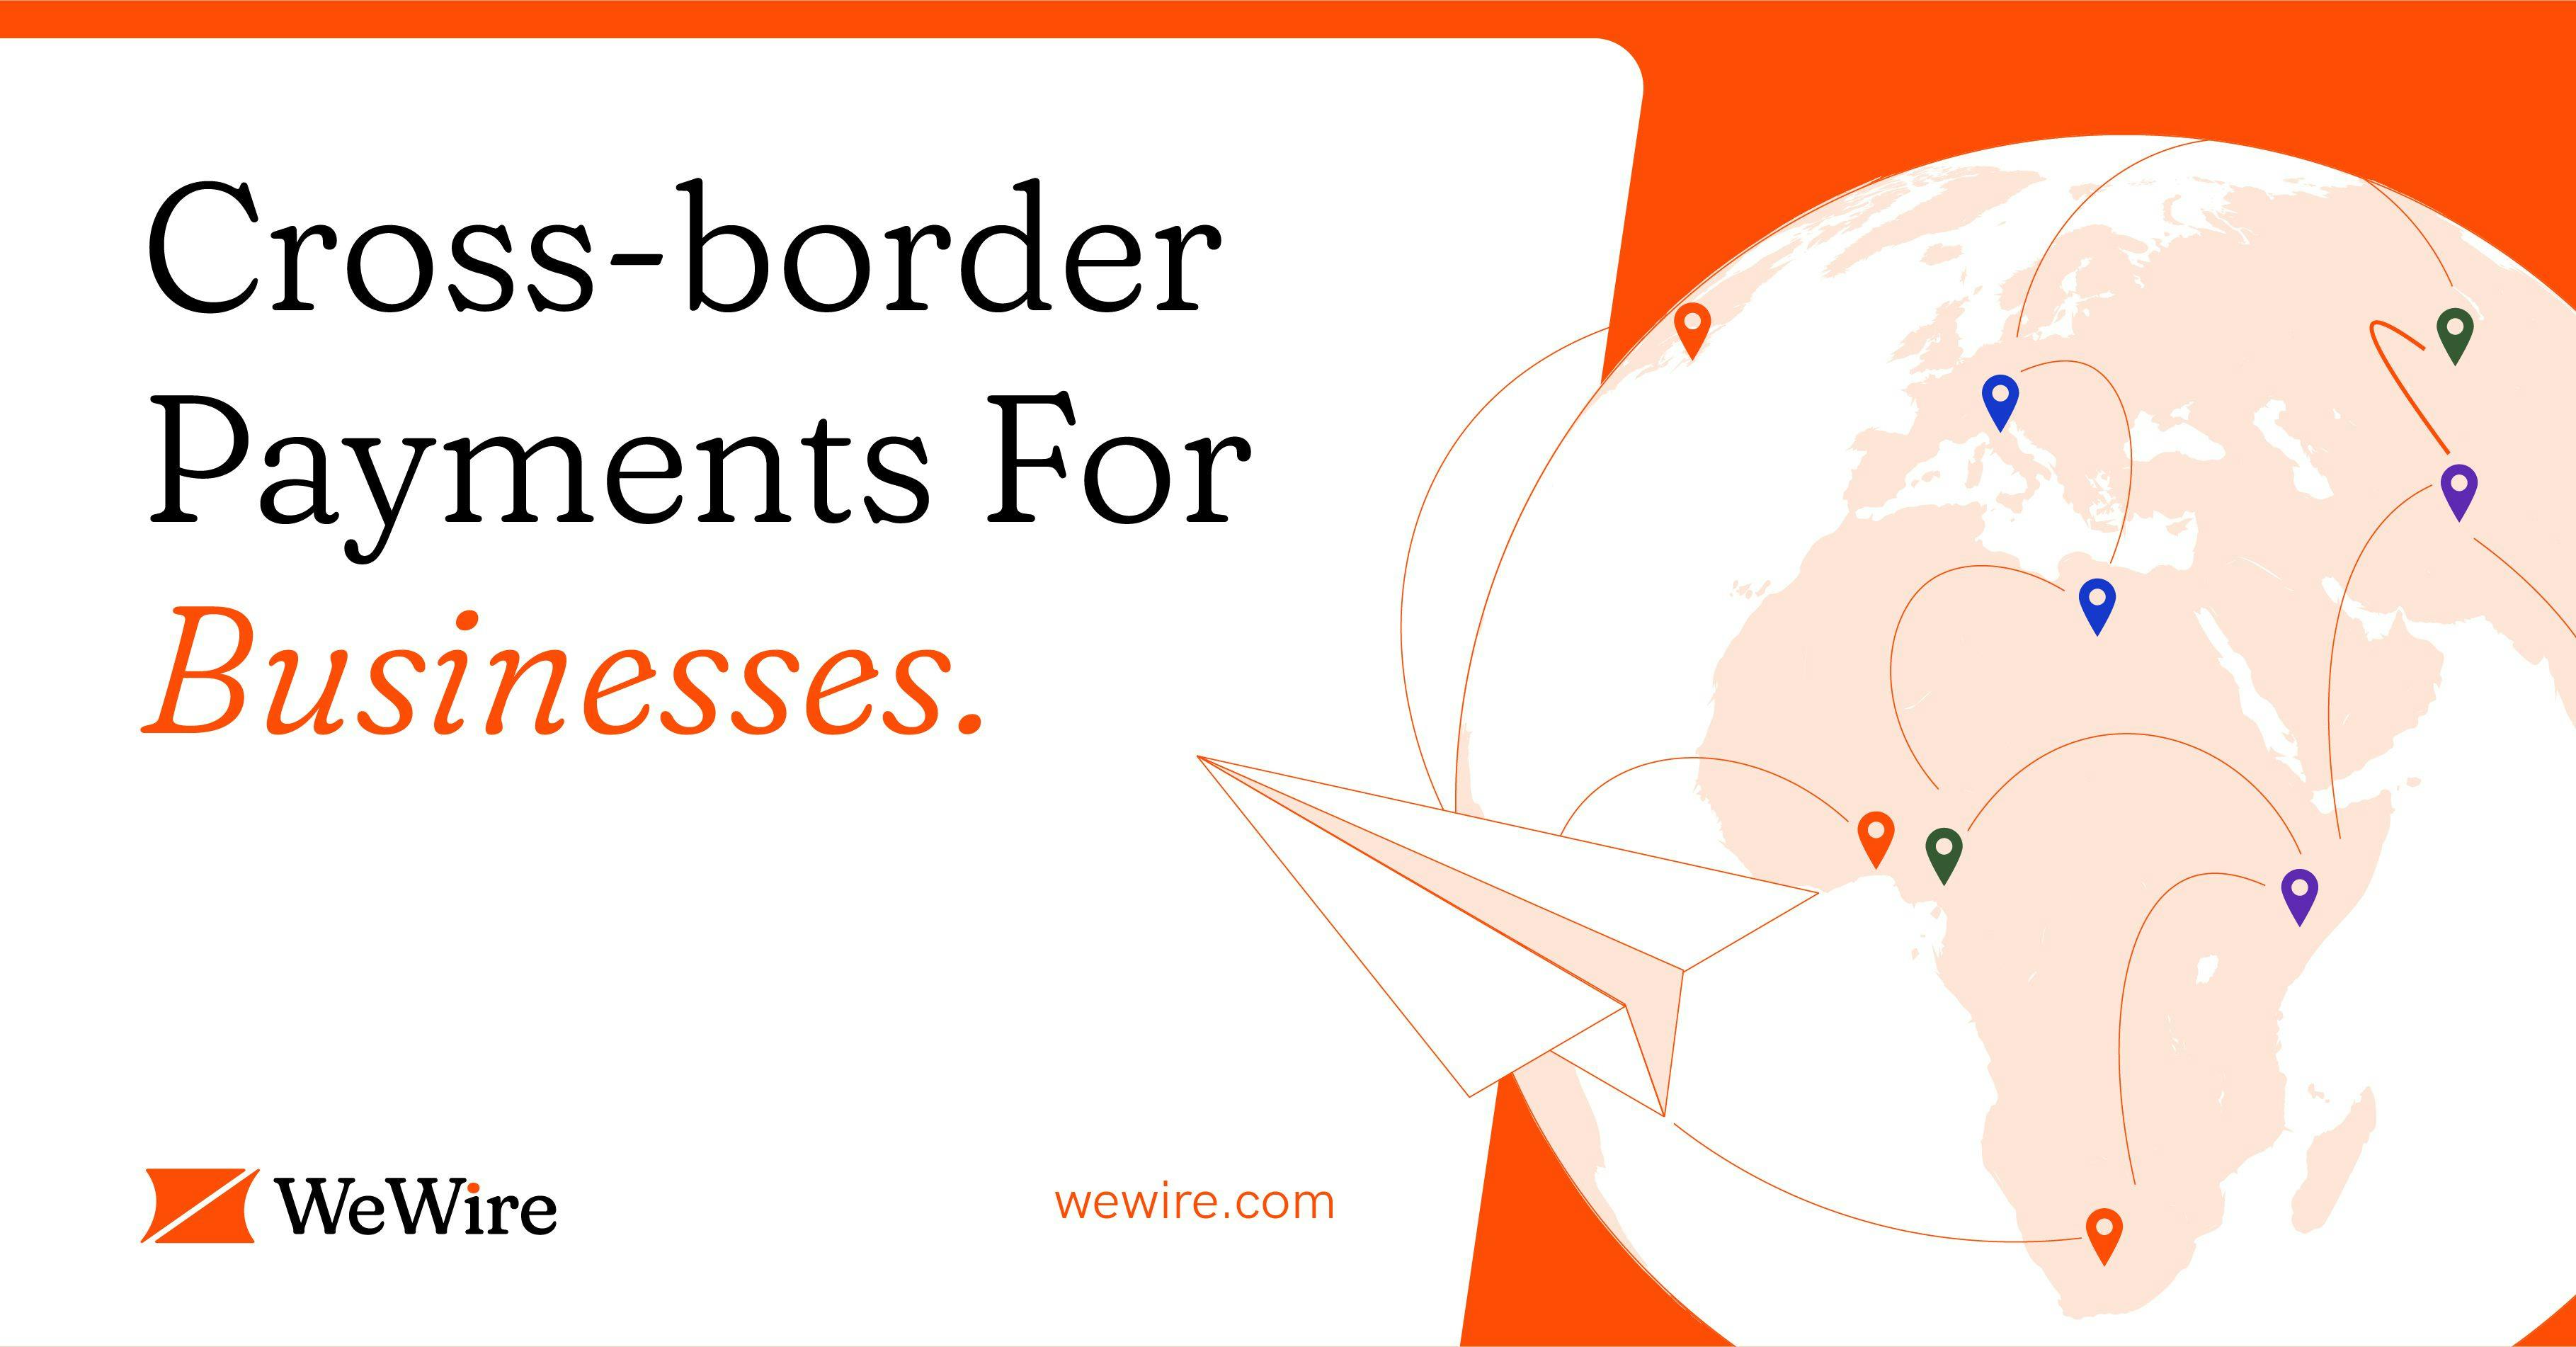 Cover Image for Beyond Borders: How WeWire surpassed $1Bn in cross-border payments in 22 months